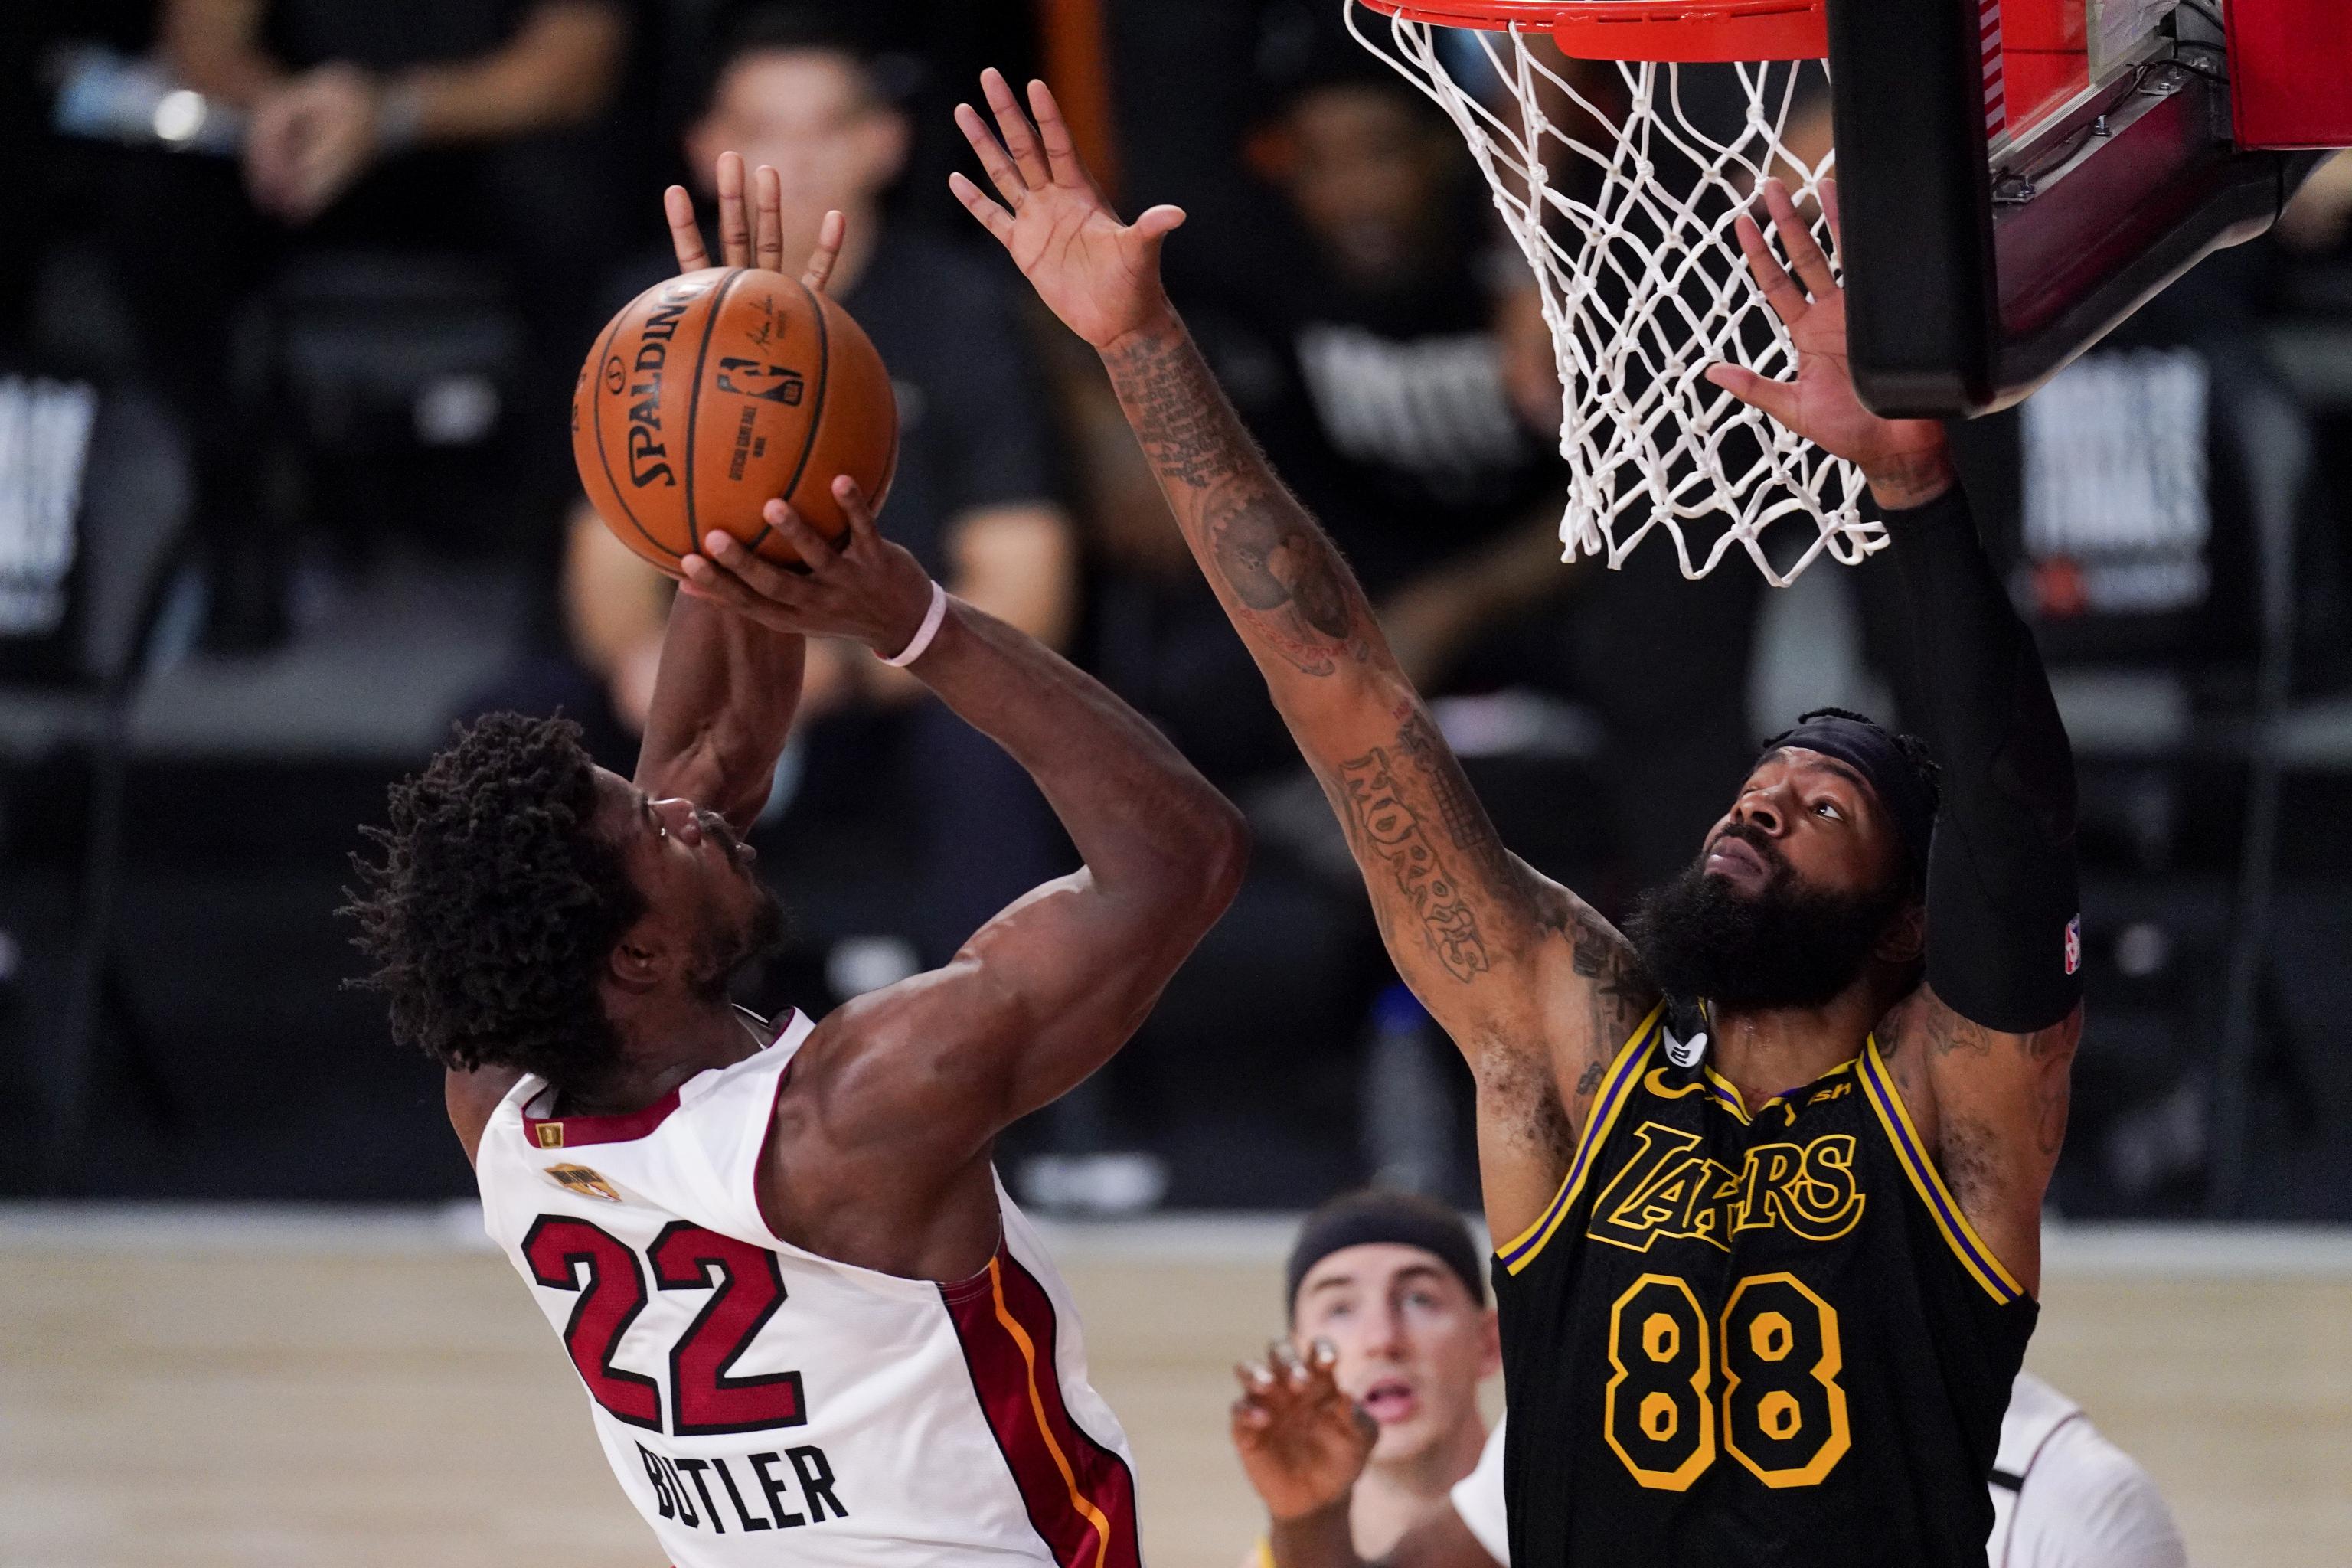 Nba L2m Lakers Fouls Vs Jimmy Butler Late In Game 5 Were Correct Calls Bleacher Report Latest News Videos And Highlights